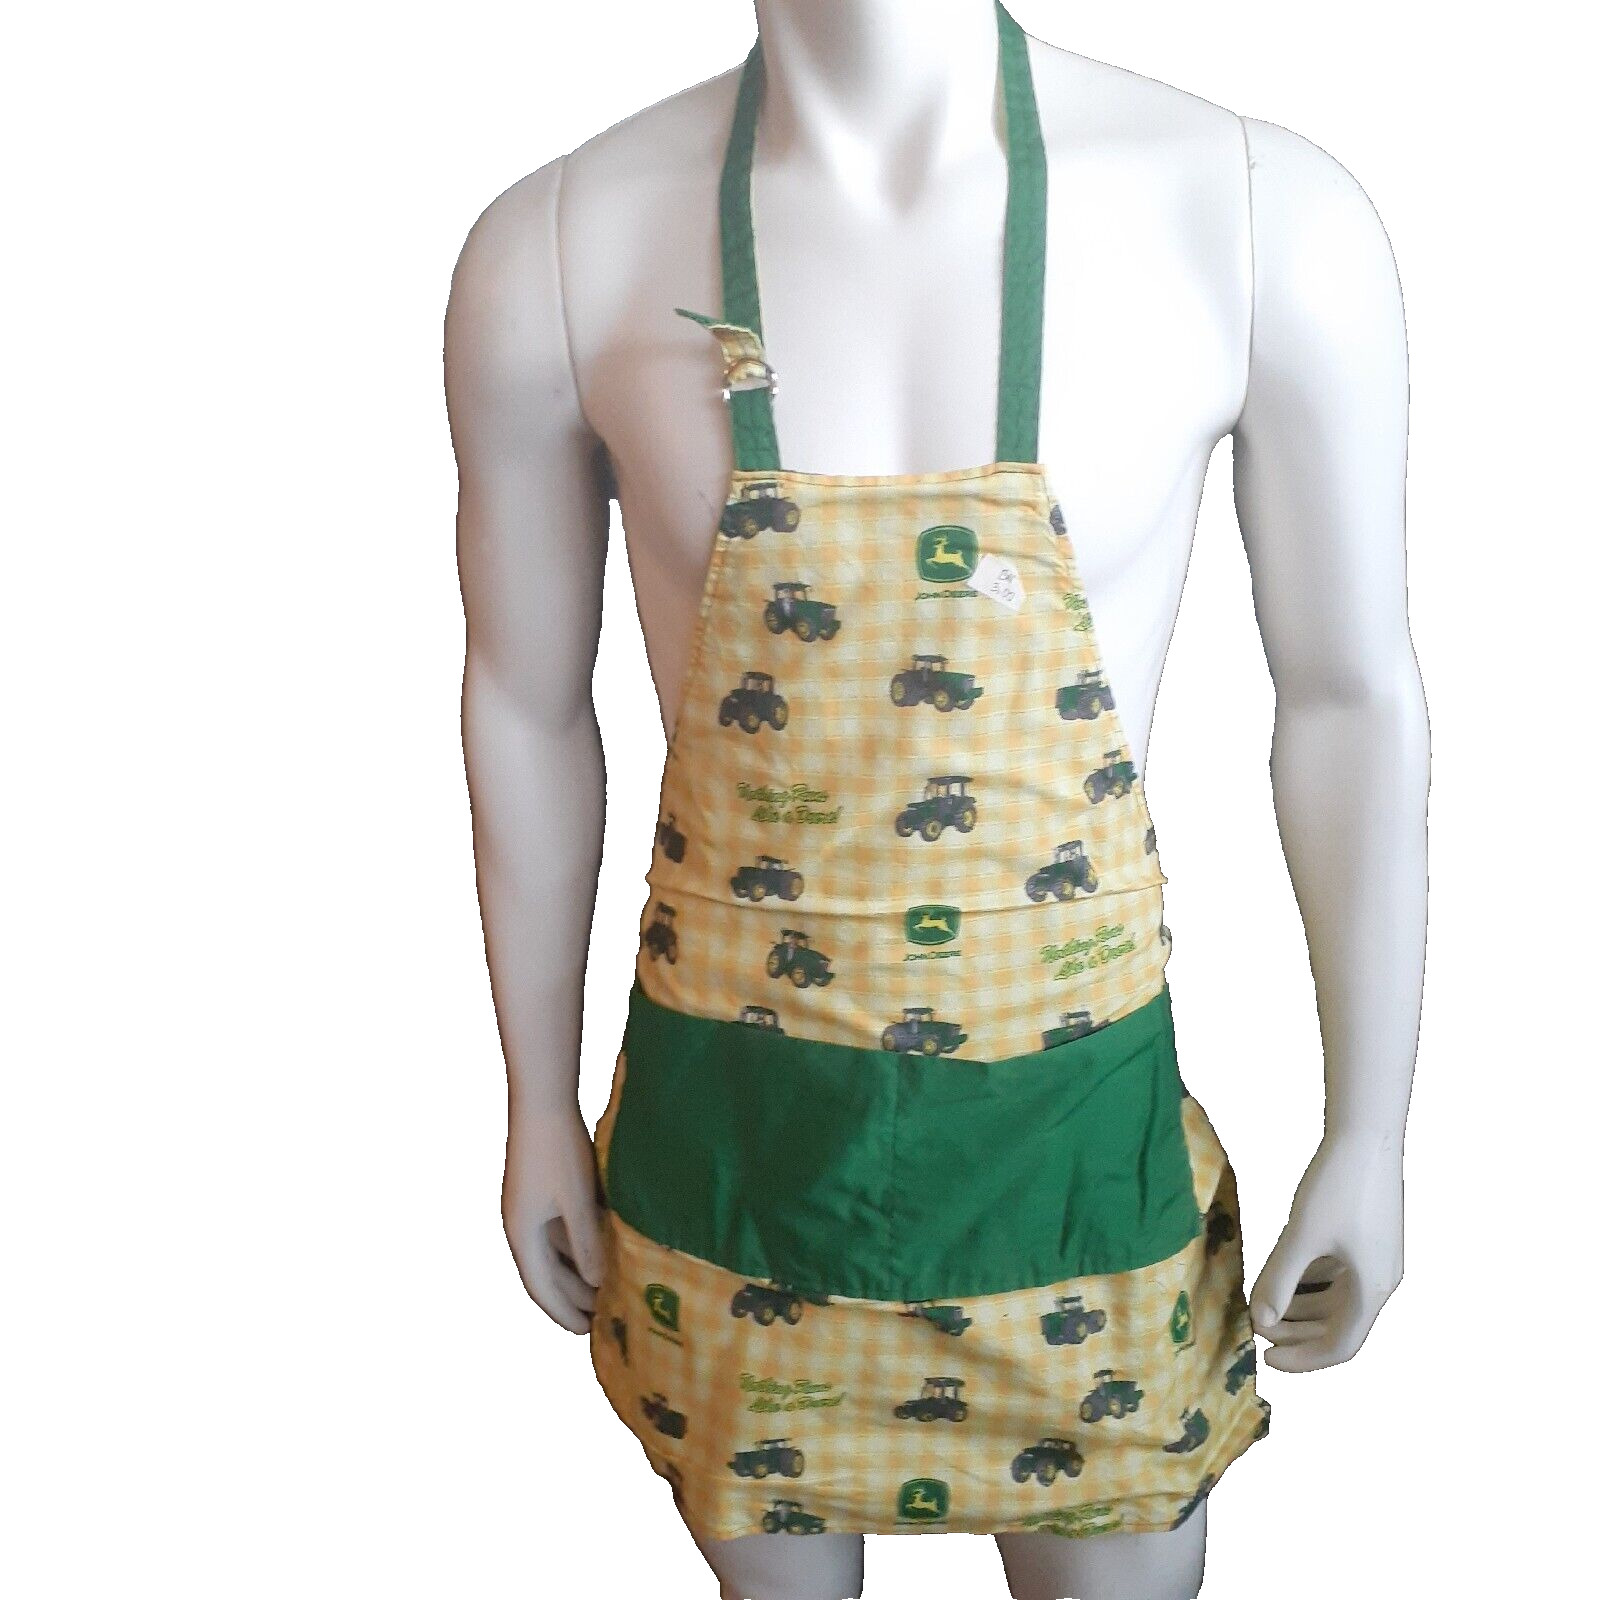 John Deere Tractors Apron Reversible With 2 Pockets Yellow Green and Green Yello